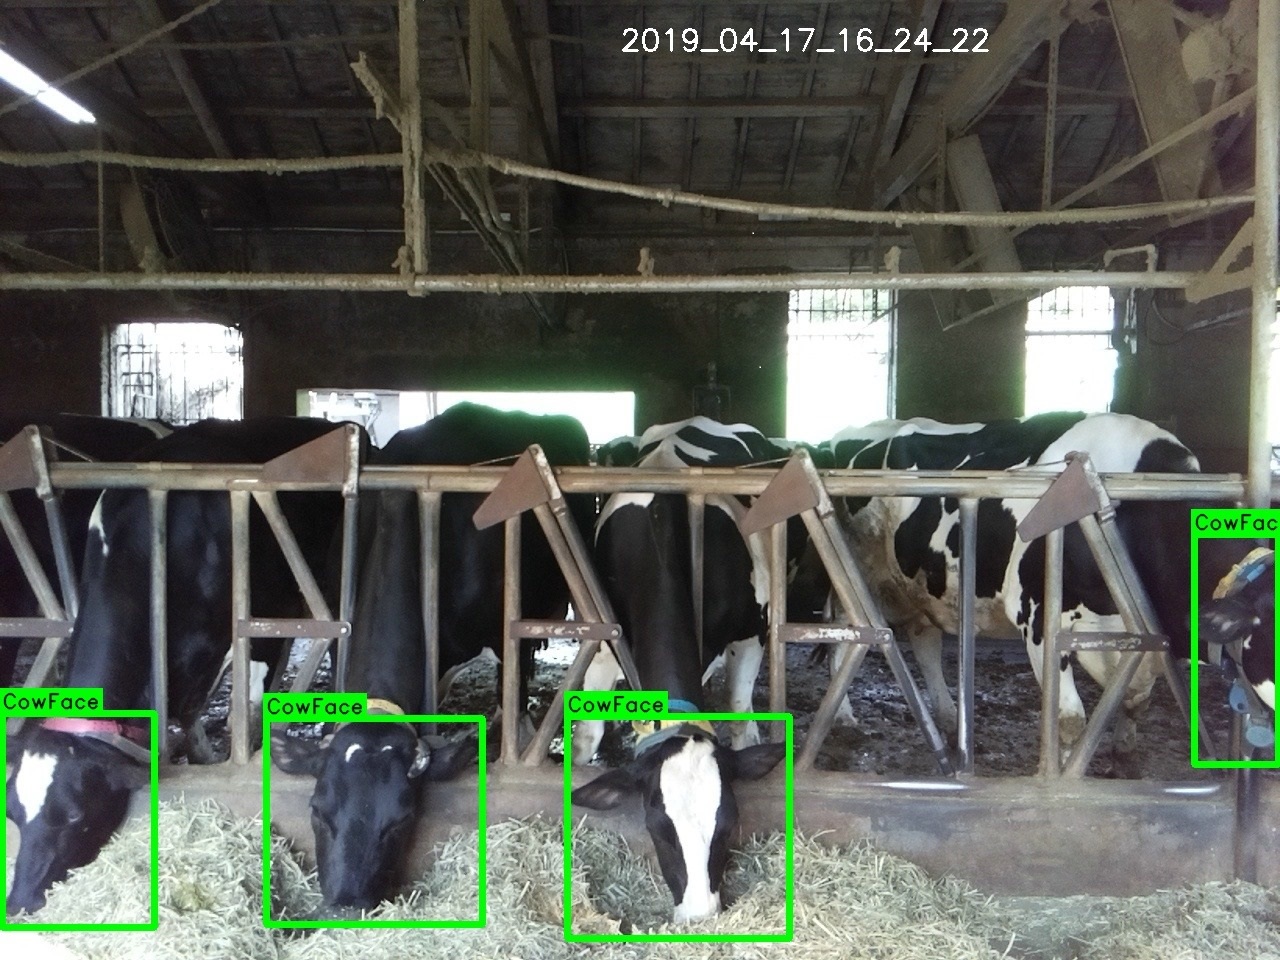 The dairy cow health monitoring smart management system can distinguish identity and monitor individual cows and capture dairy cow behavior in real time.